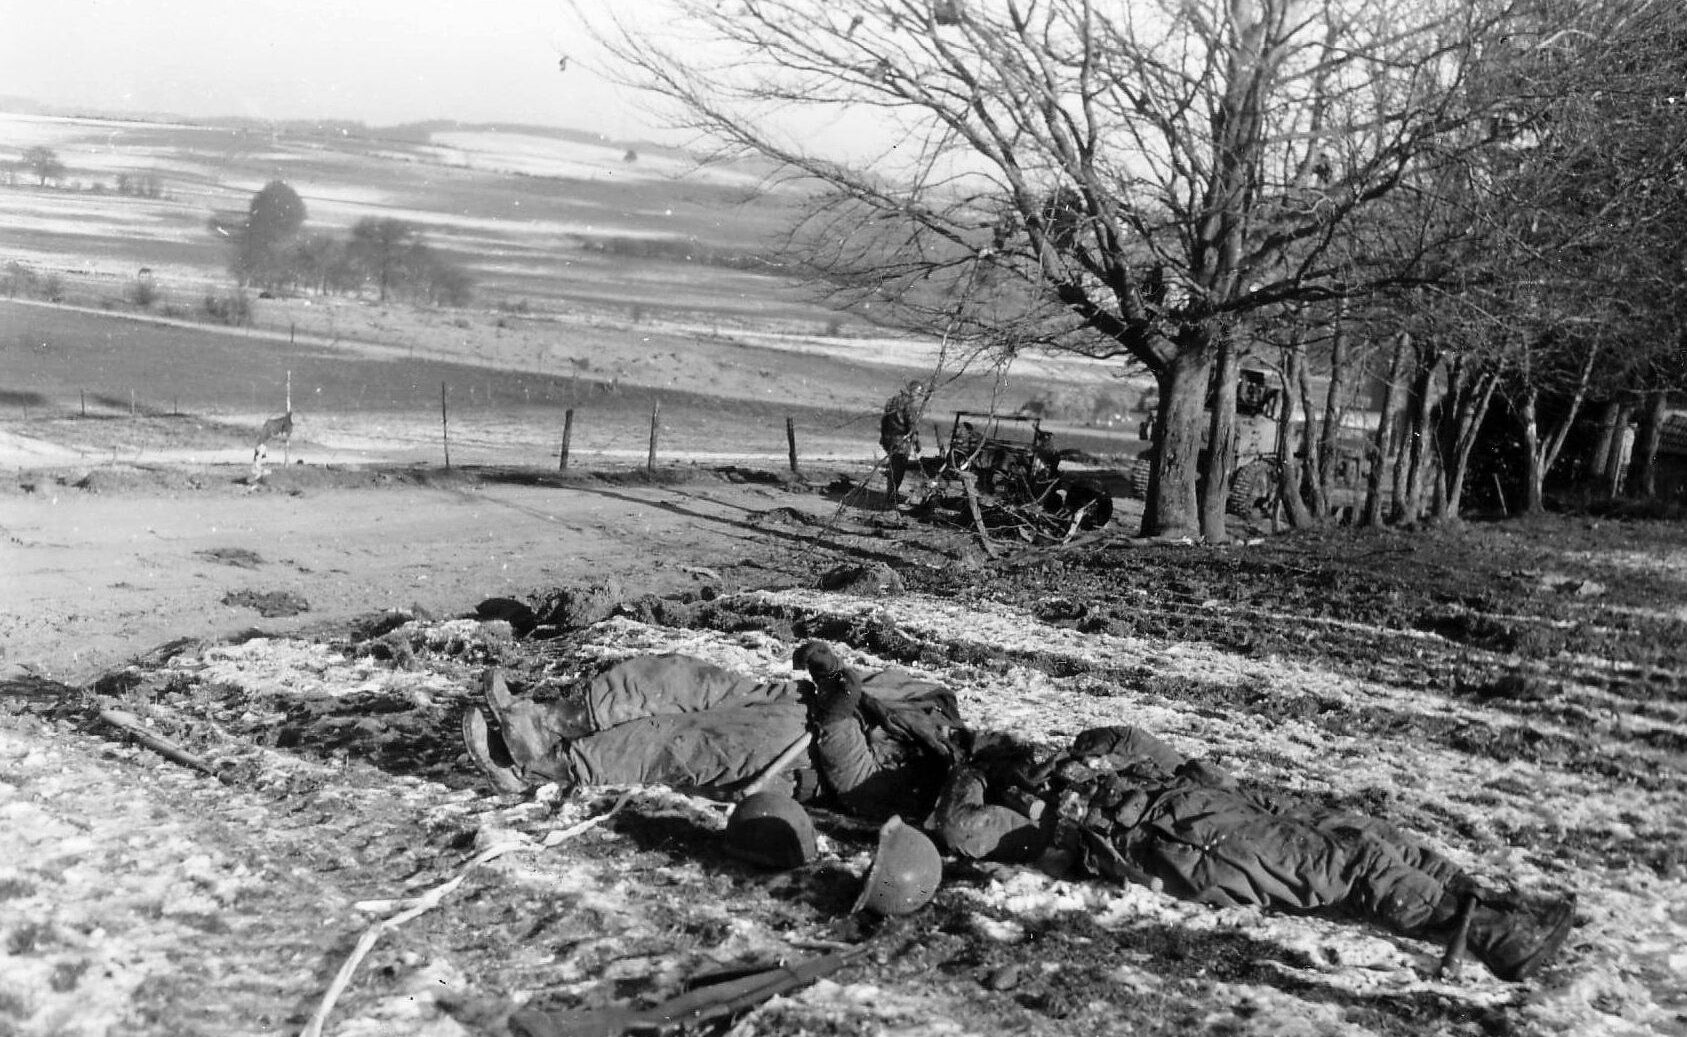 The fighting at Chaumont took a heavy toll in American lives. Here, two slain GIs lie in a snowy field. 